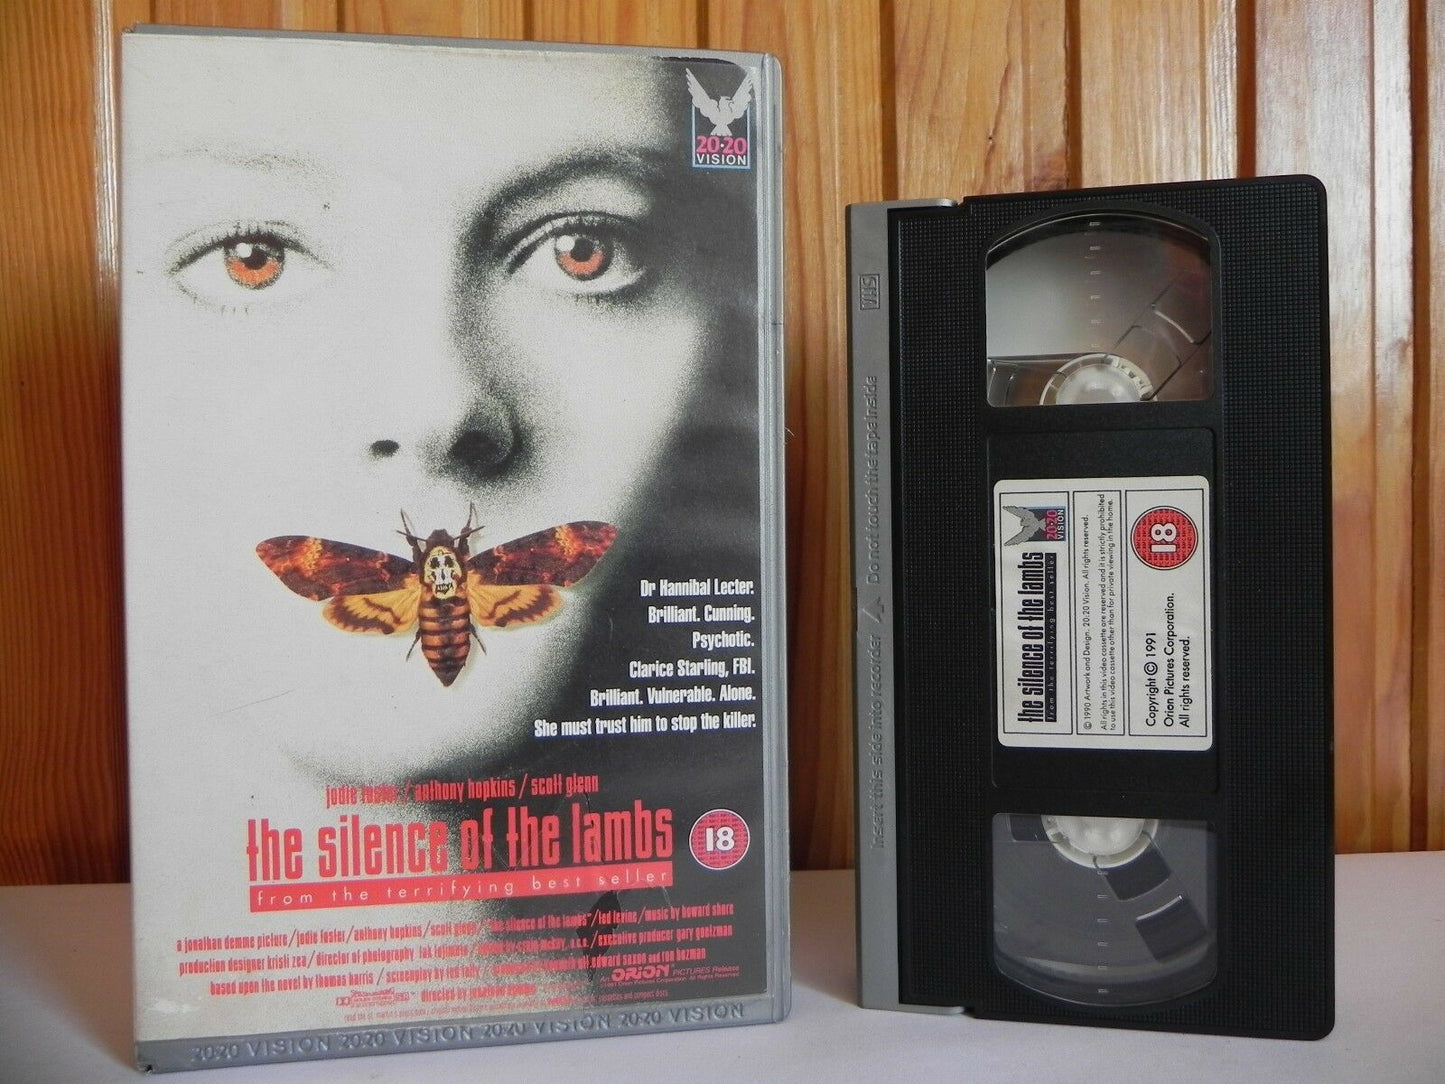 The Silence Of The Lambs - 20 20 Vision - Thriller - Cert (18) - Large Box - VHS-